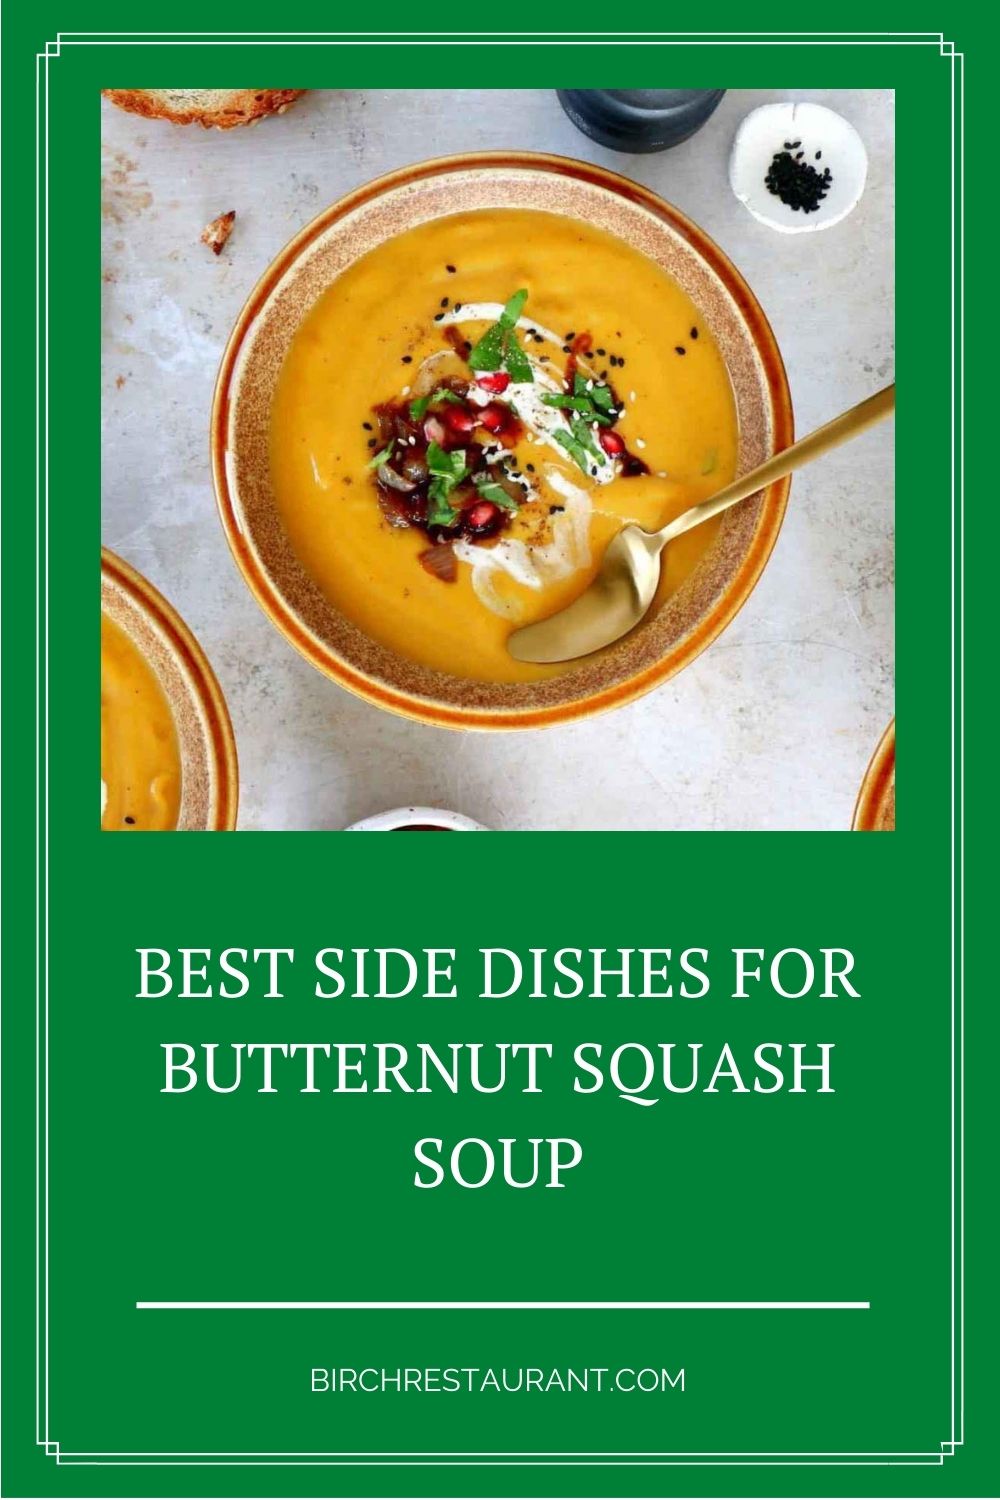 Best Side Dishes for Butternut Squash Soup